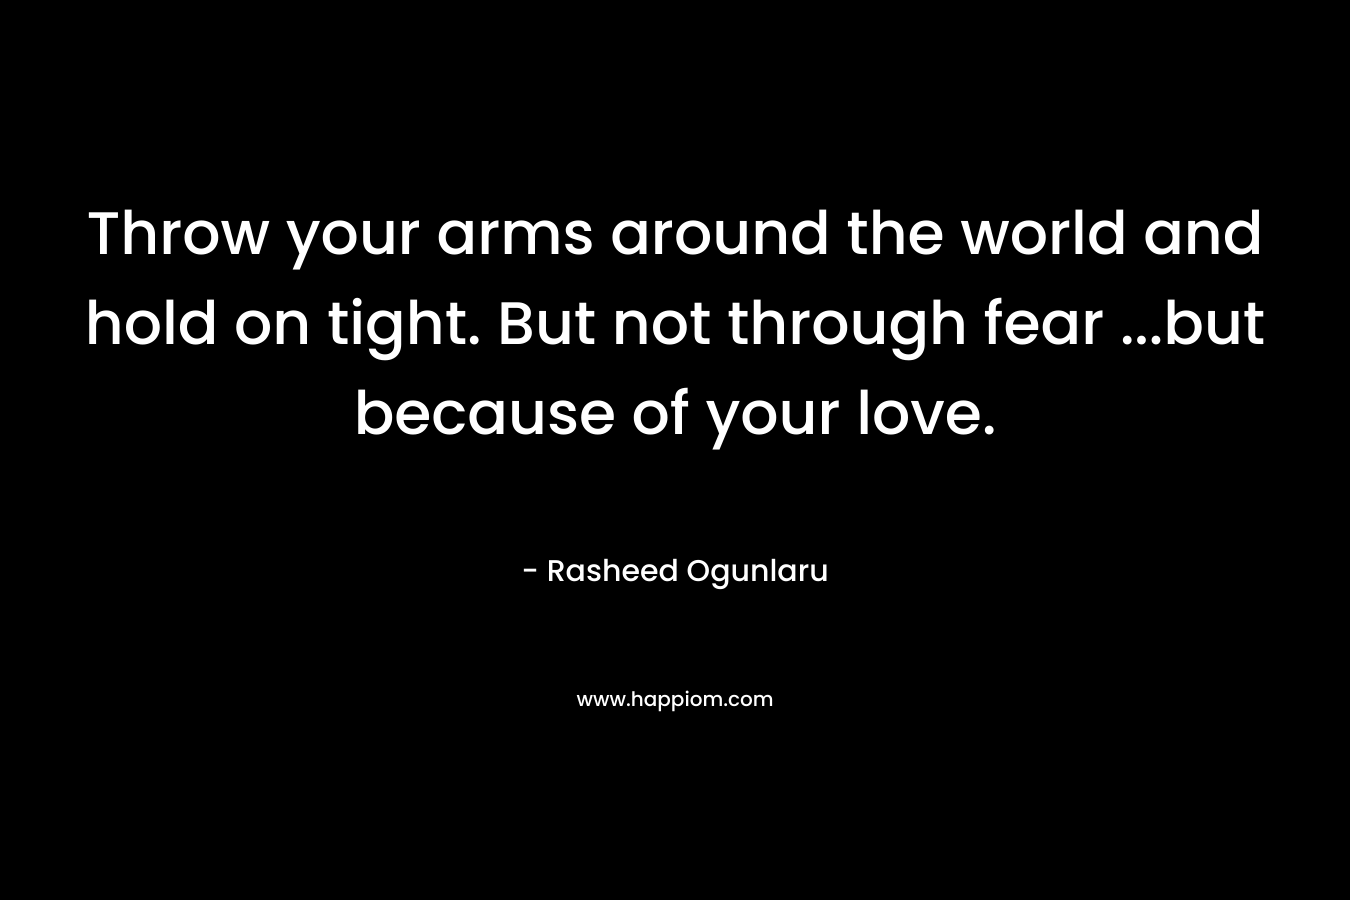 Throw your arms around the world and hold on tight. But not through fear …but because of your love. – Rasheed Ogunlaru